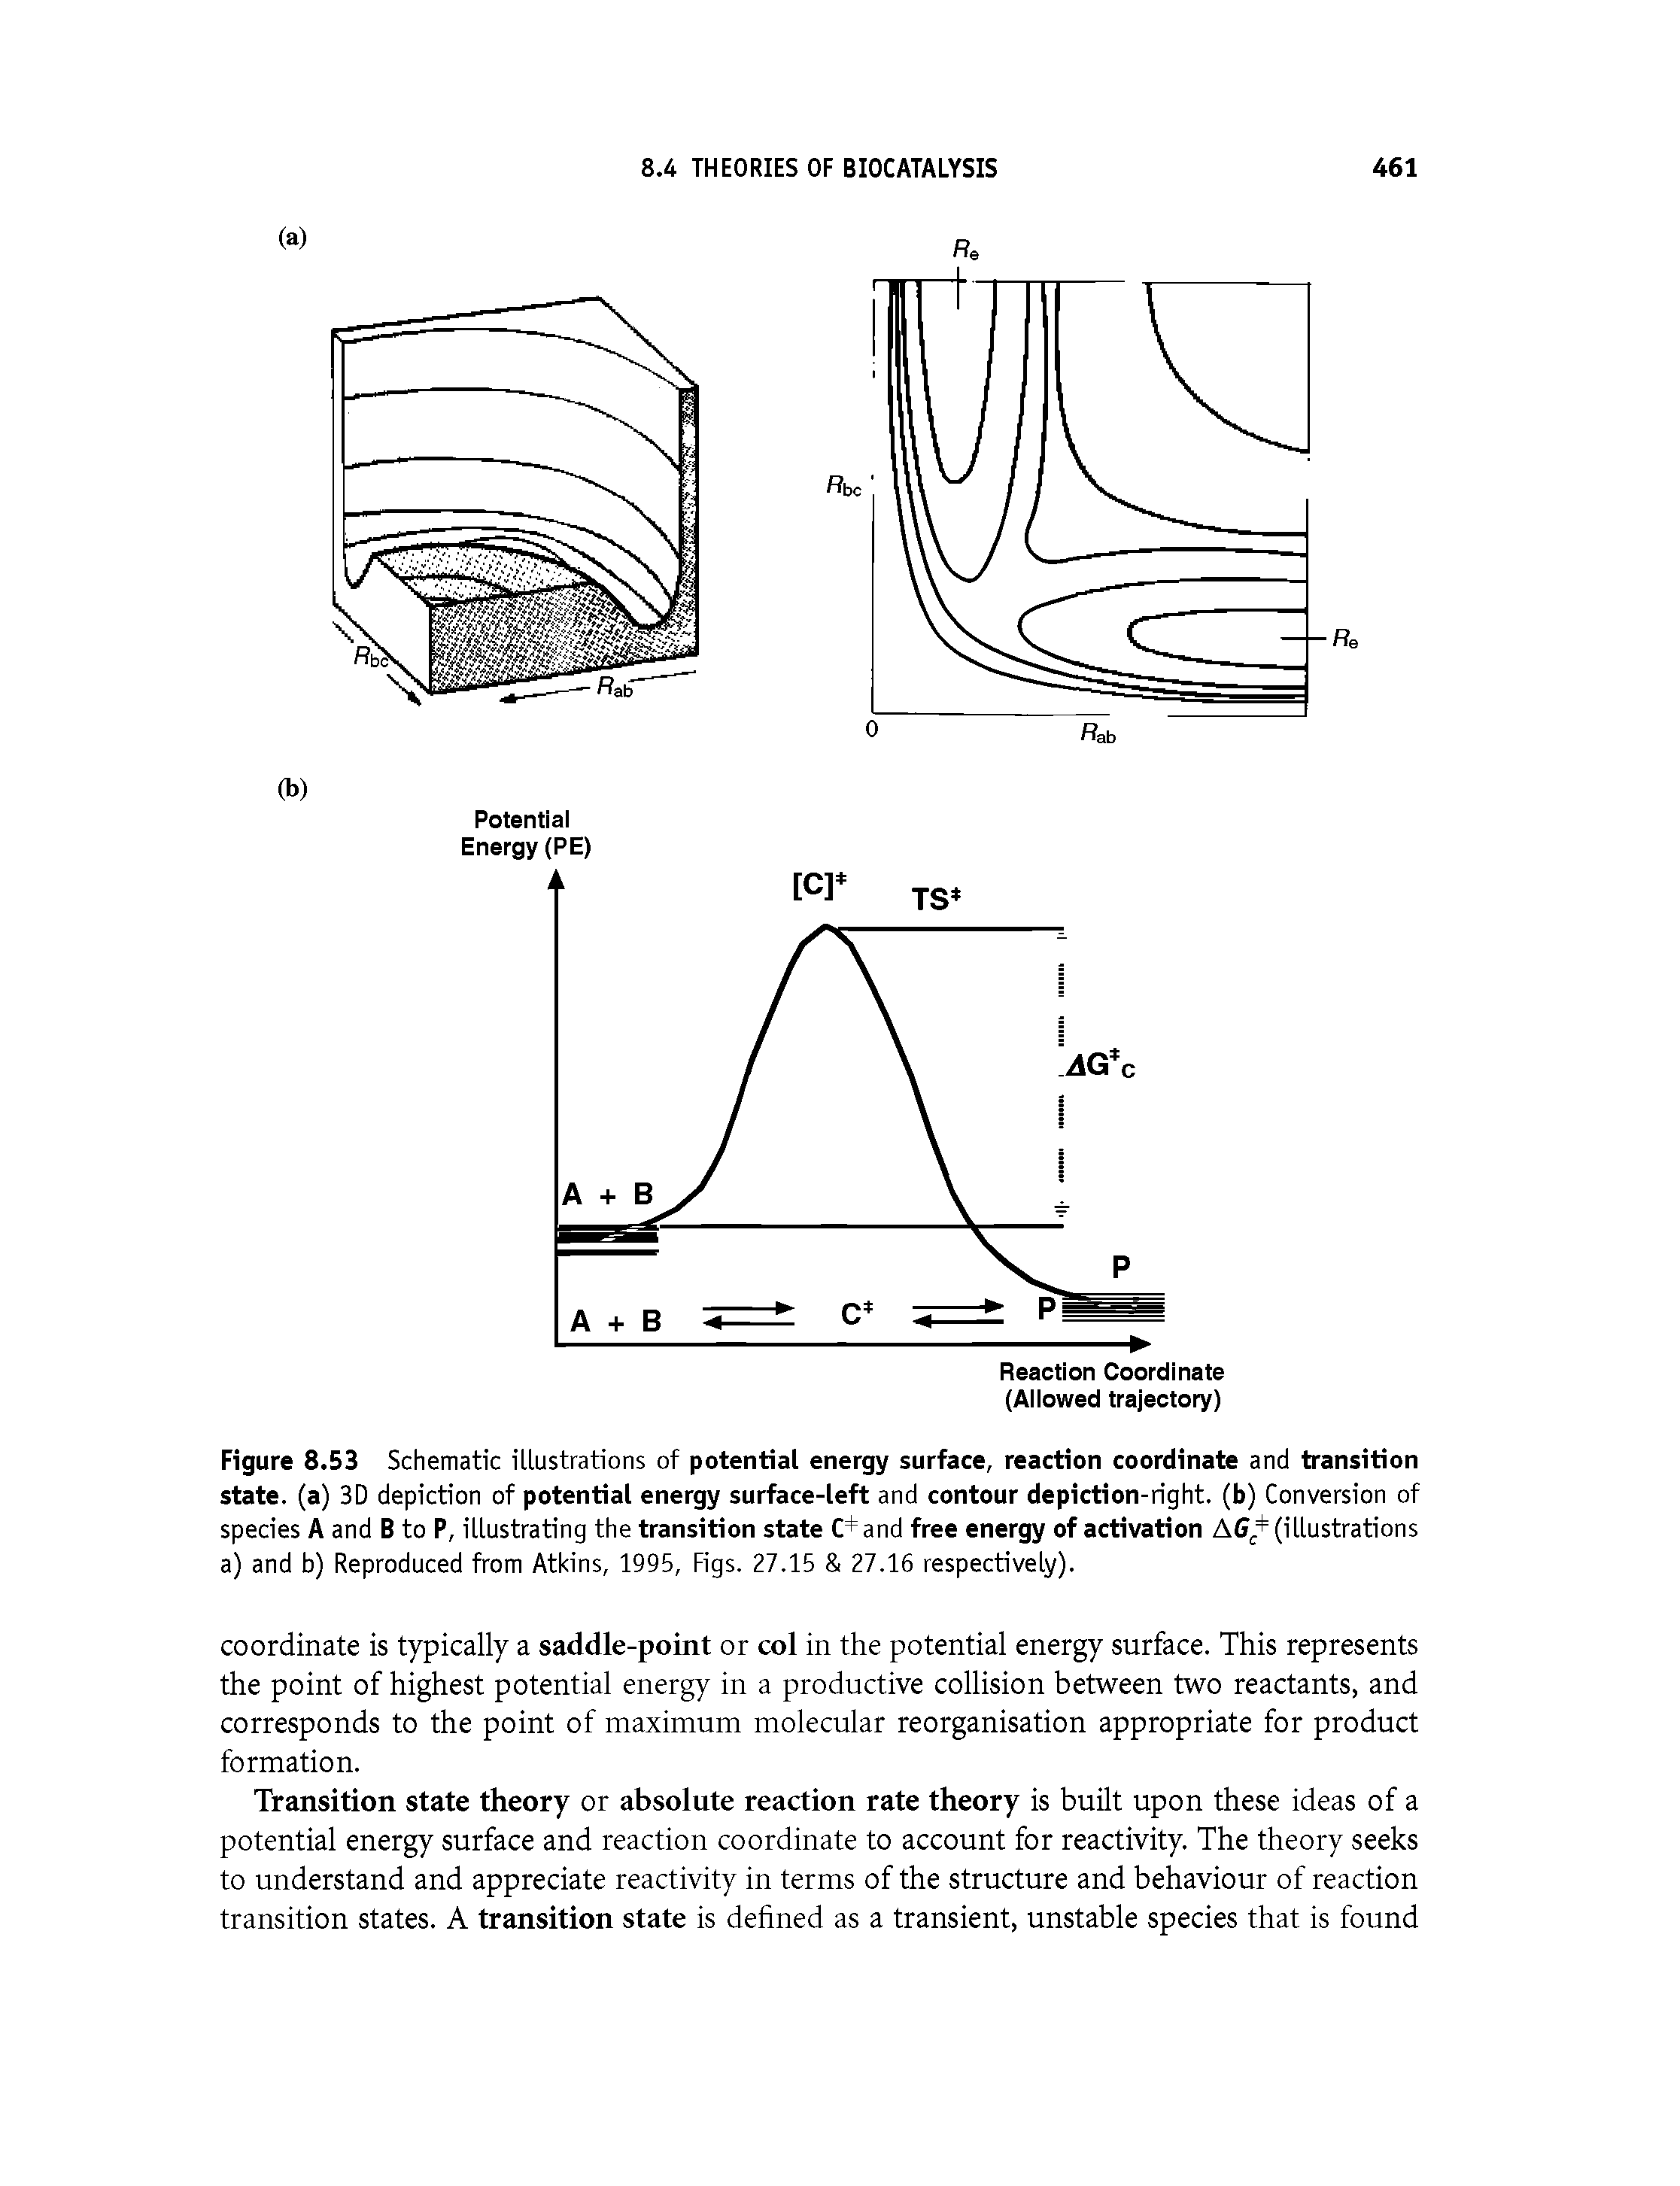 Figure 8.53 Schematic illustrations of potential energy surface, reaction coordinate and transition state, (a) 3D depiction of potential energy surface-left and contour depiction-right, (b) Conversion of species A and B to P, illustrating the transition state C+and free energy of activation A6 +(illustrations a) and b) Reproduced from Atkins, 1995, Figs. 27.15 27.16 respectively).